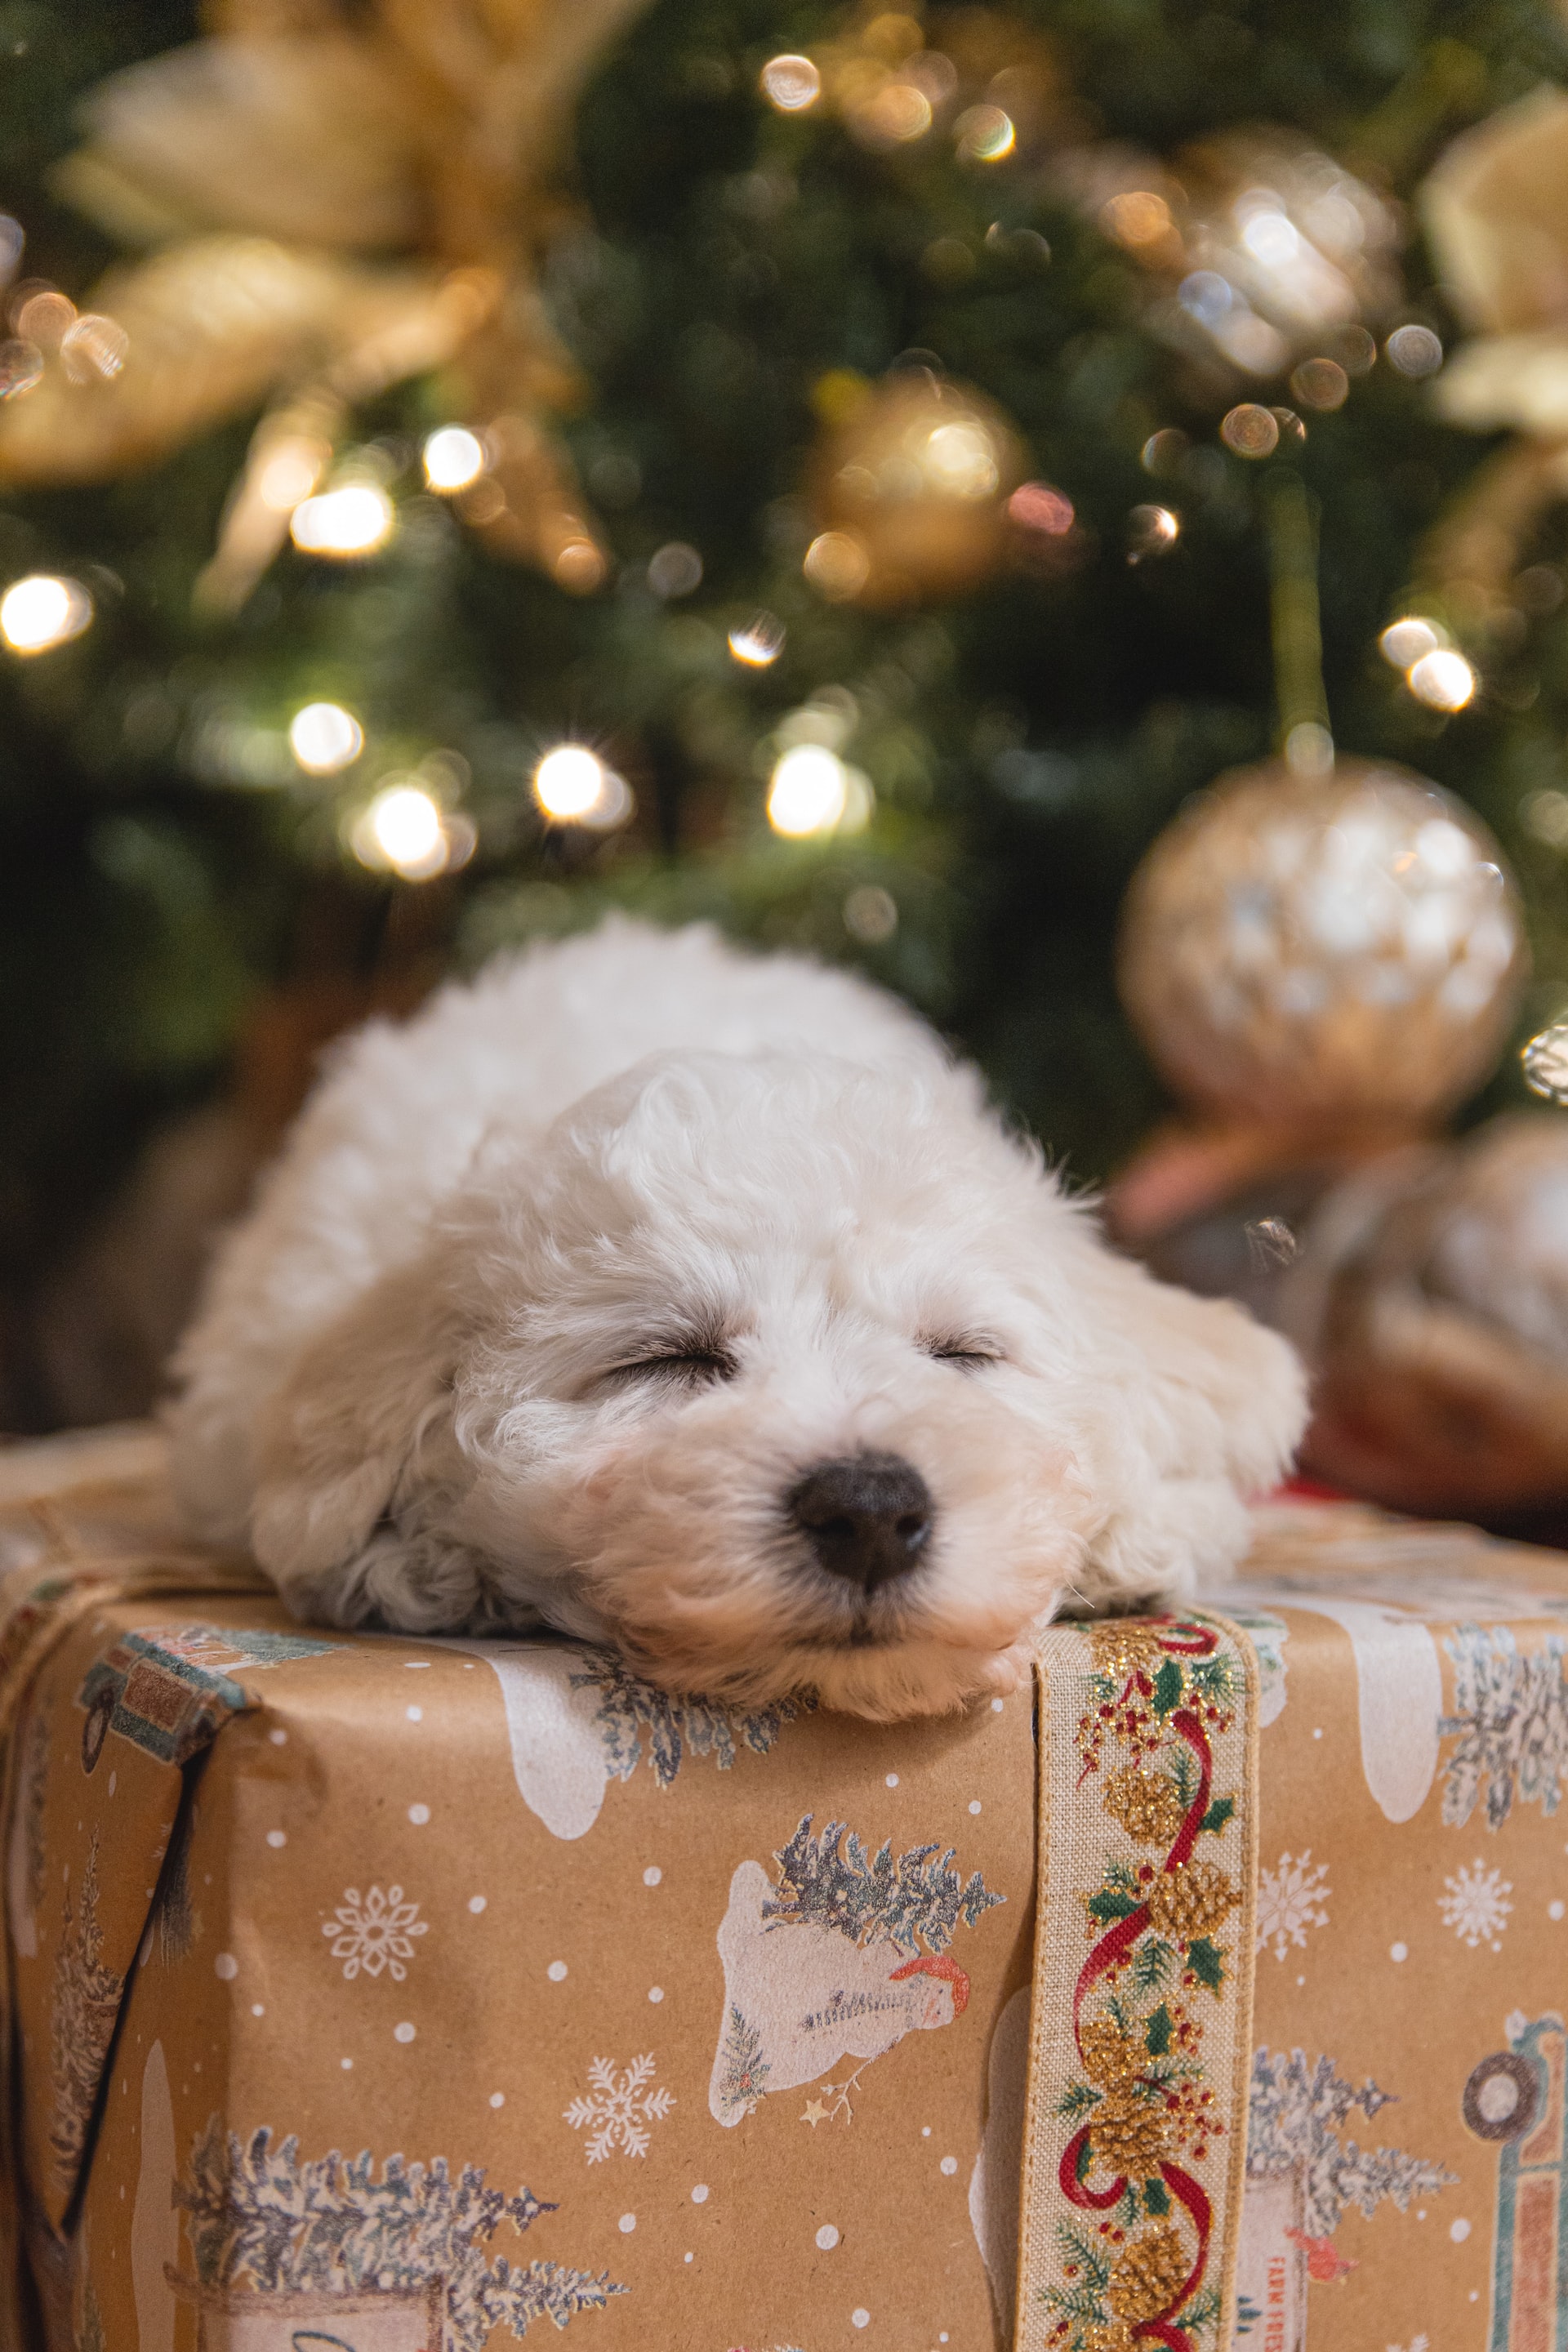 The Best Presents for Your Dog